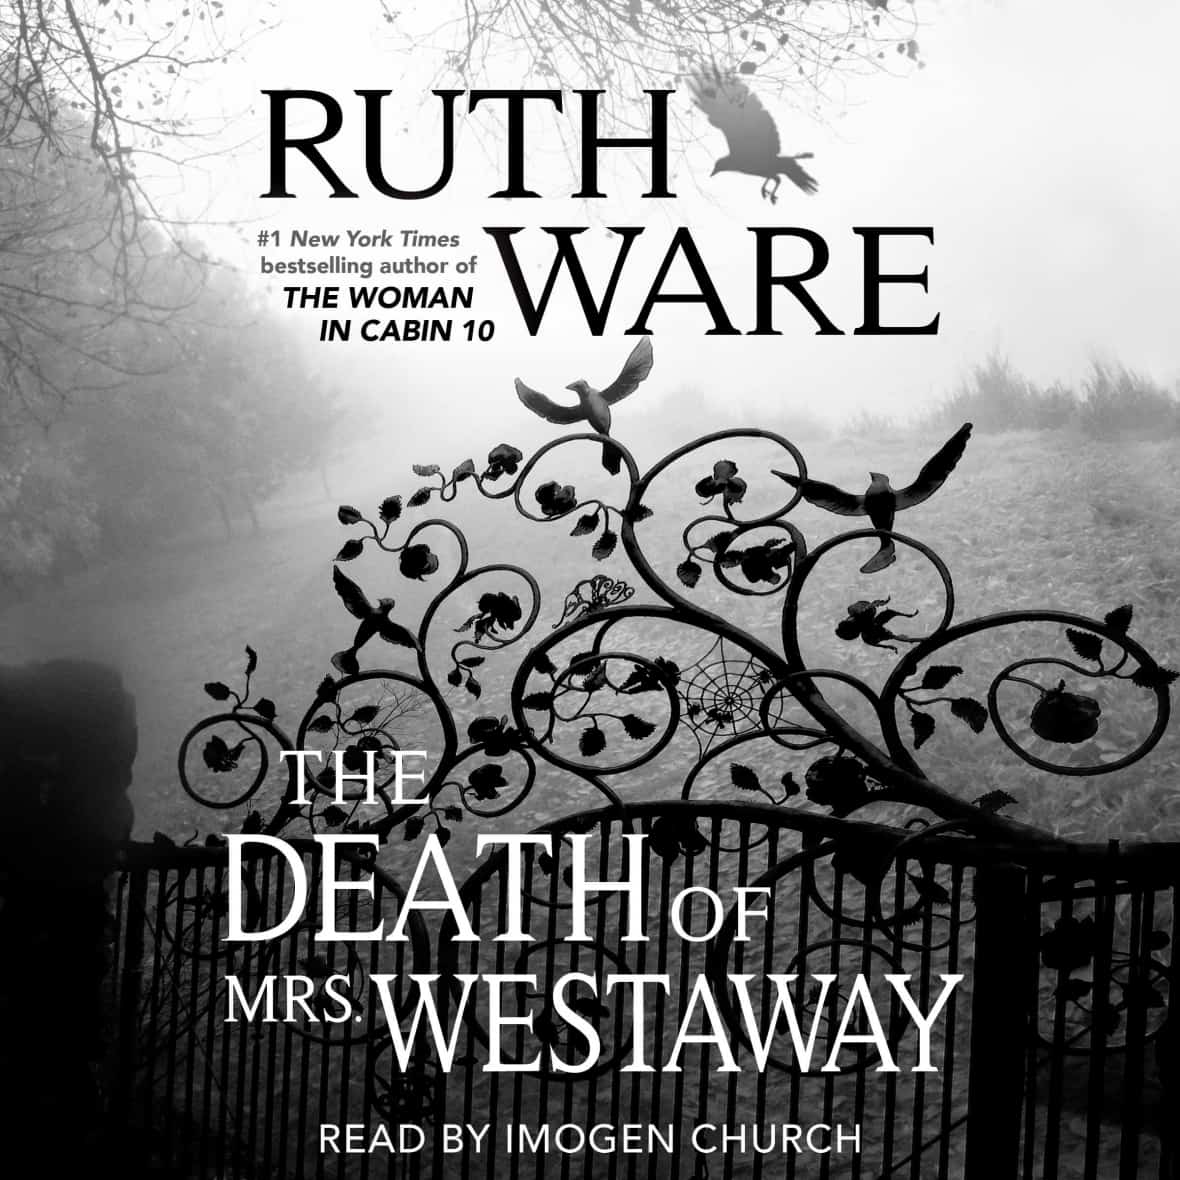 The Death of Mrs. Westaway  by Ruth Ware